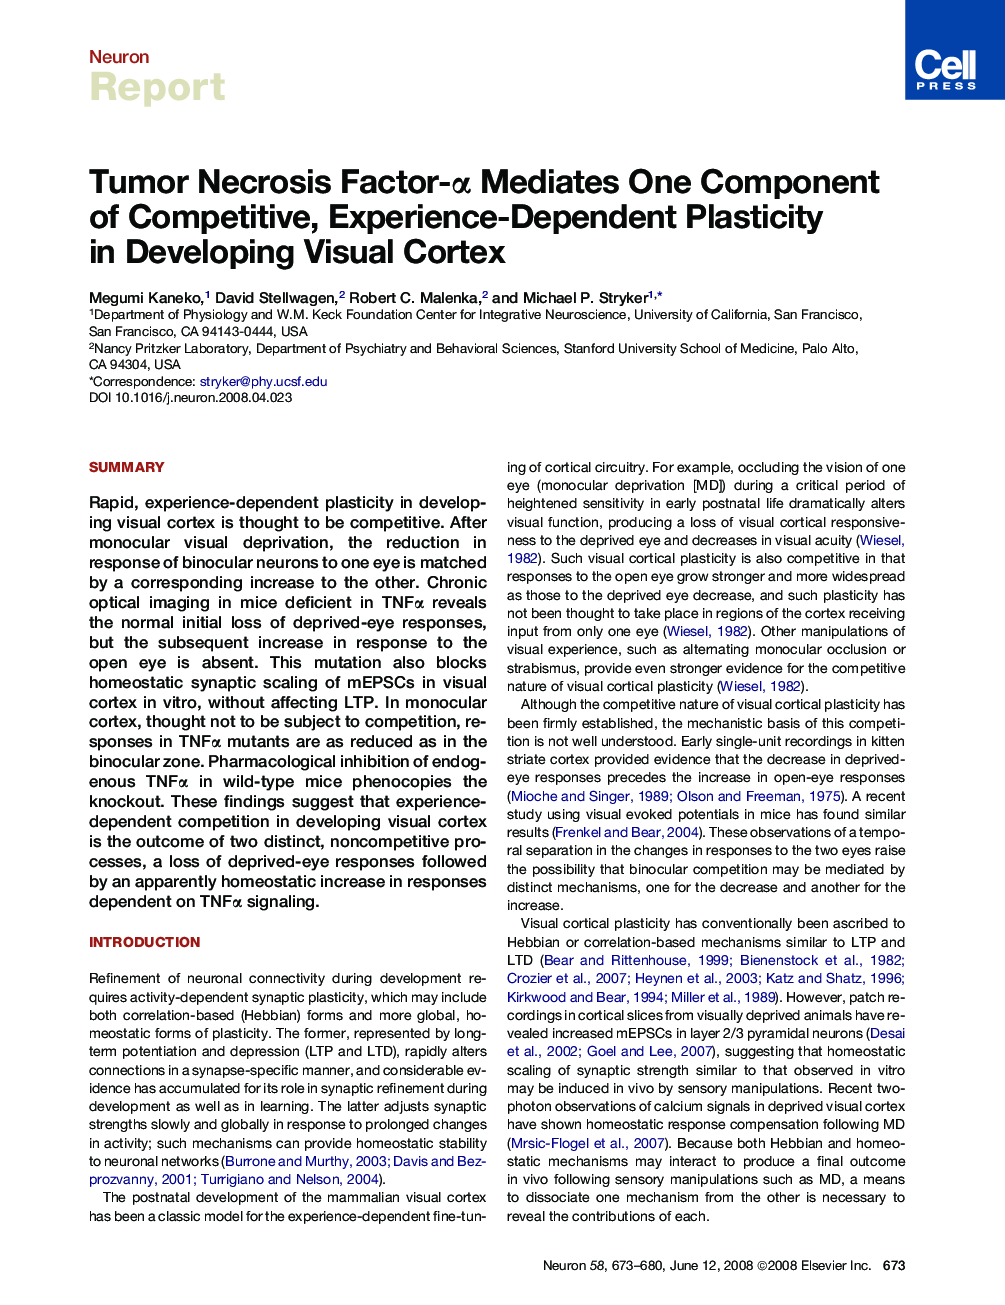 Tumor Necrosis Factor-α Mediates One Component of Competitive, Experience-Dependent Plasticity in Developing Visual Cortex